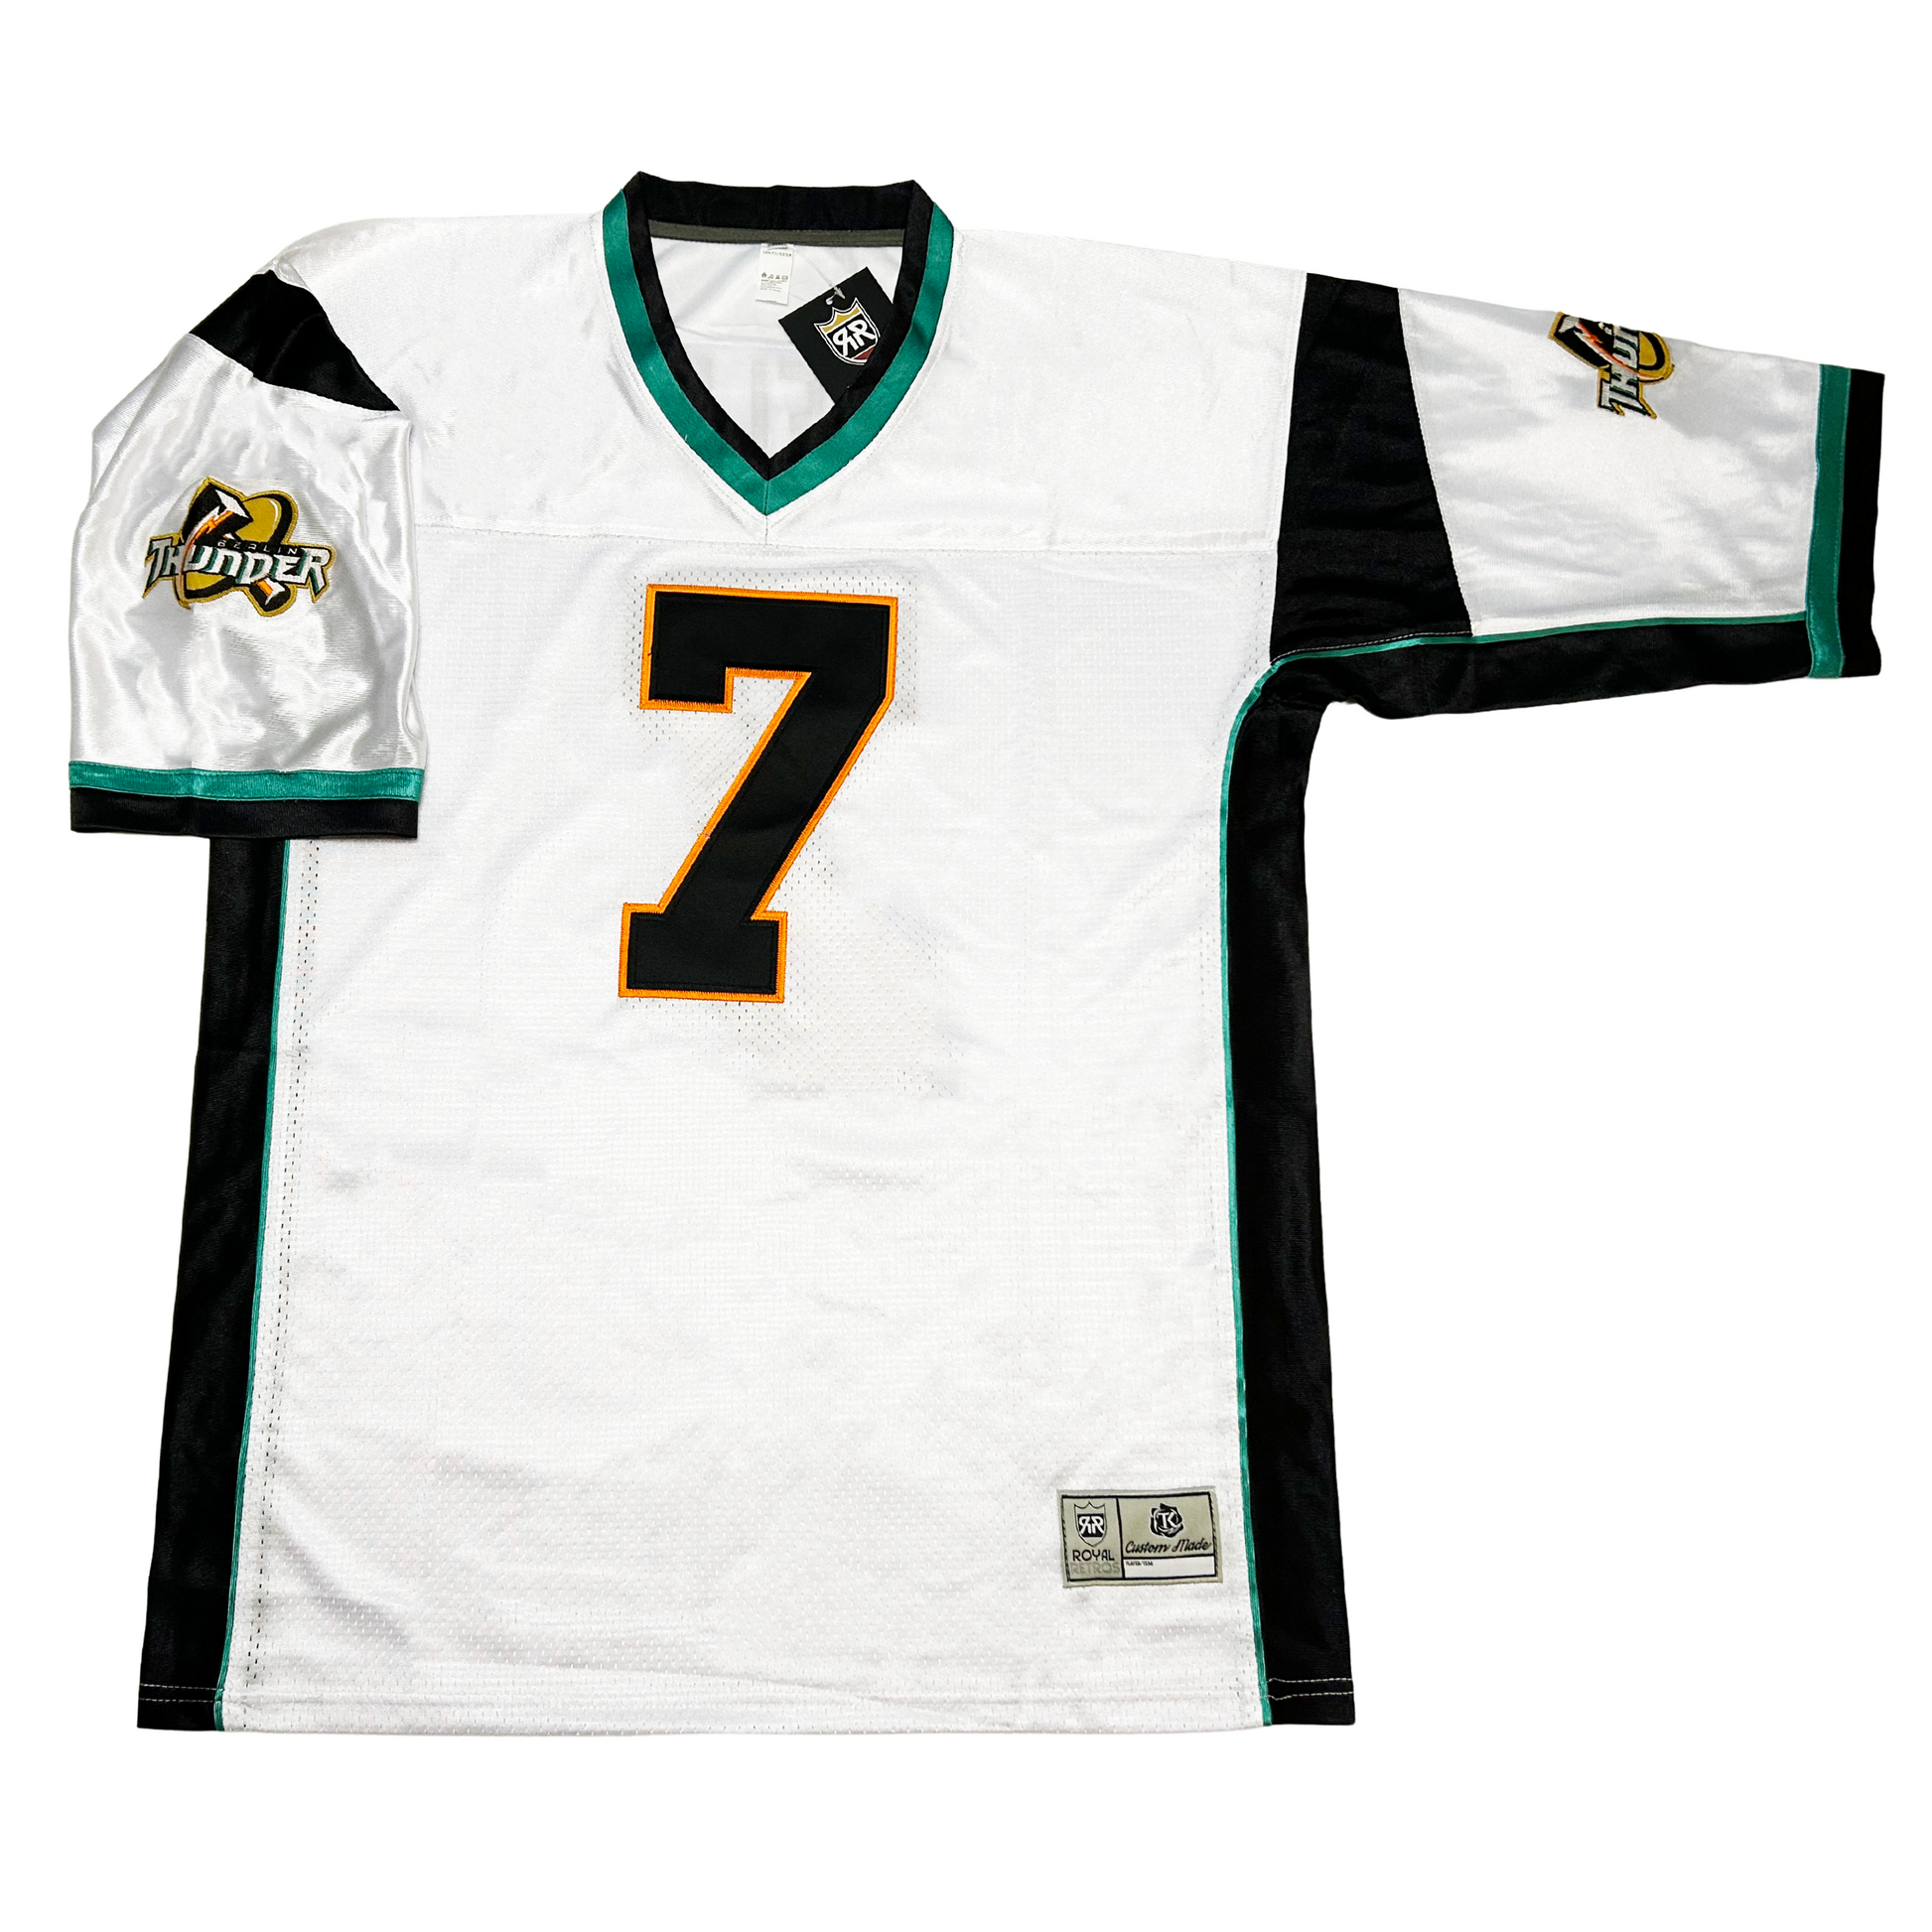 Berlin Thunder WLAF jersey front white  Royal Retros